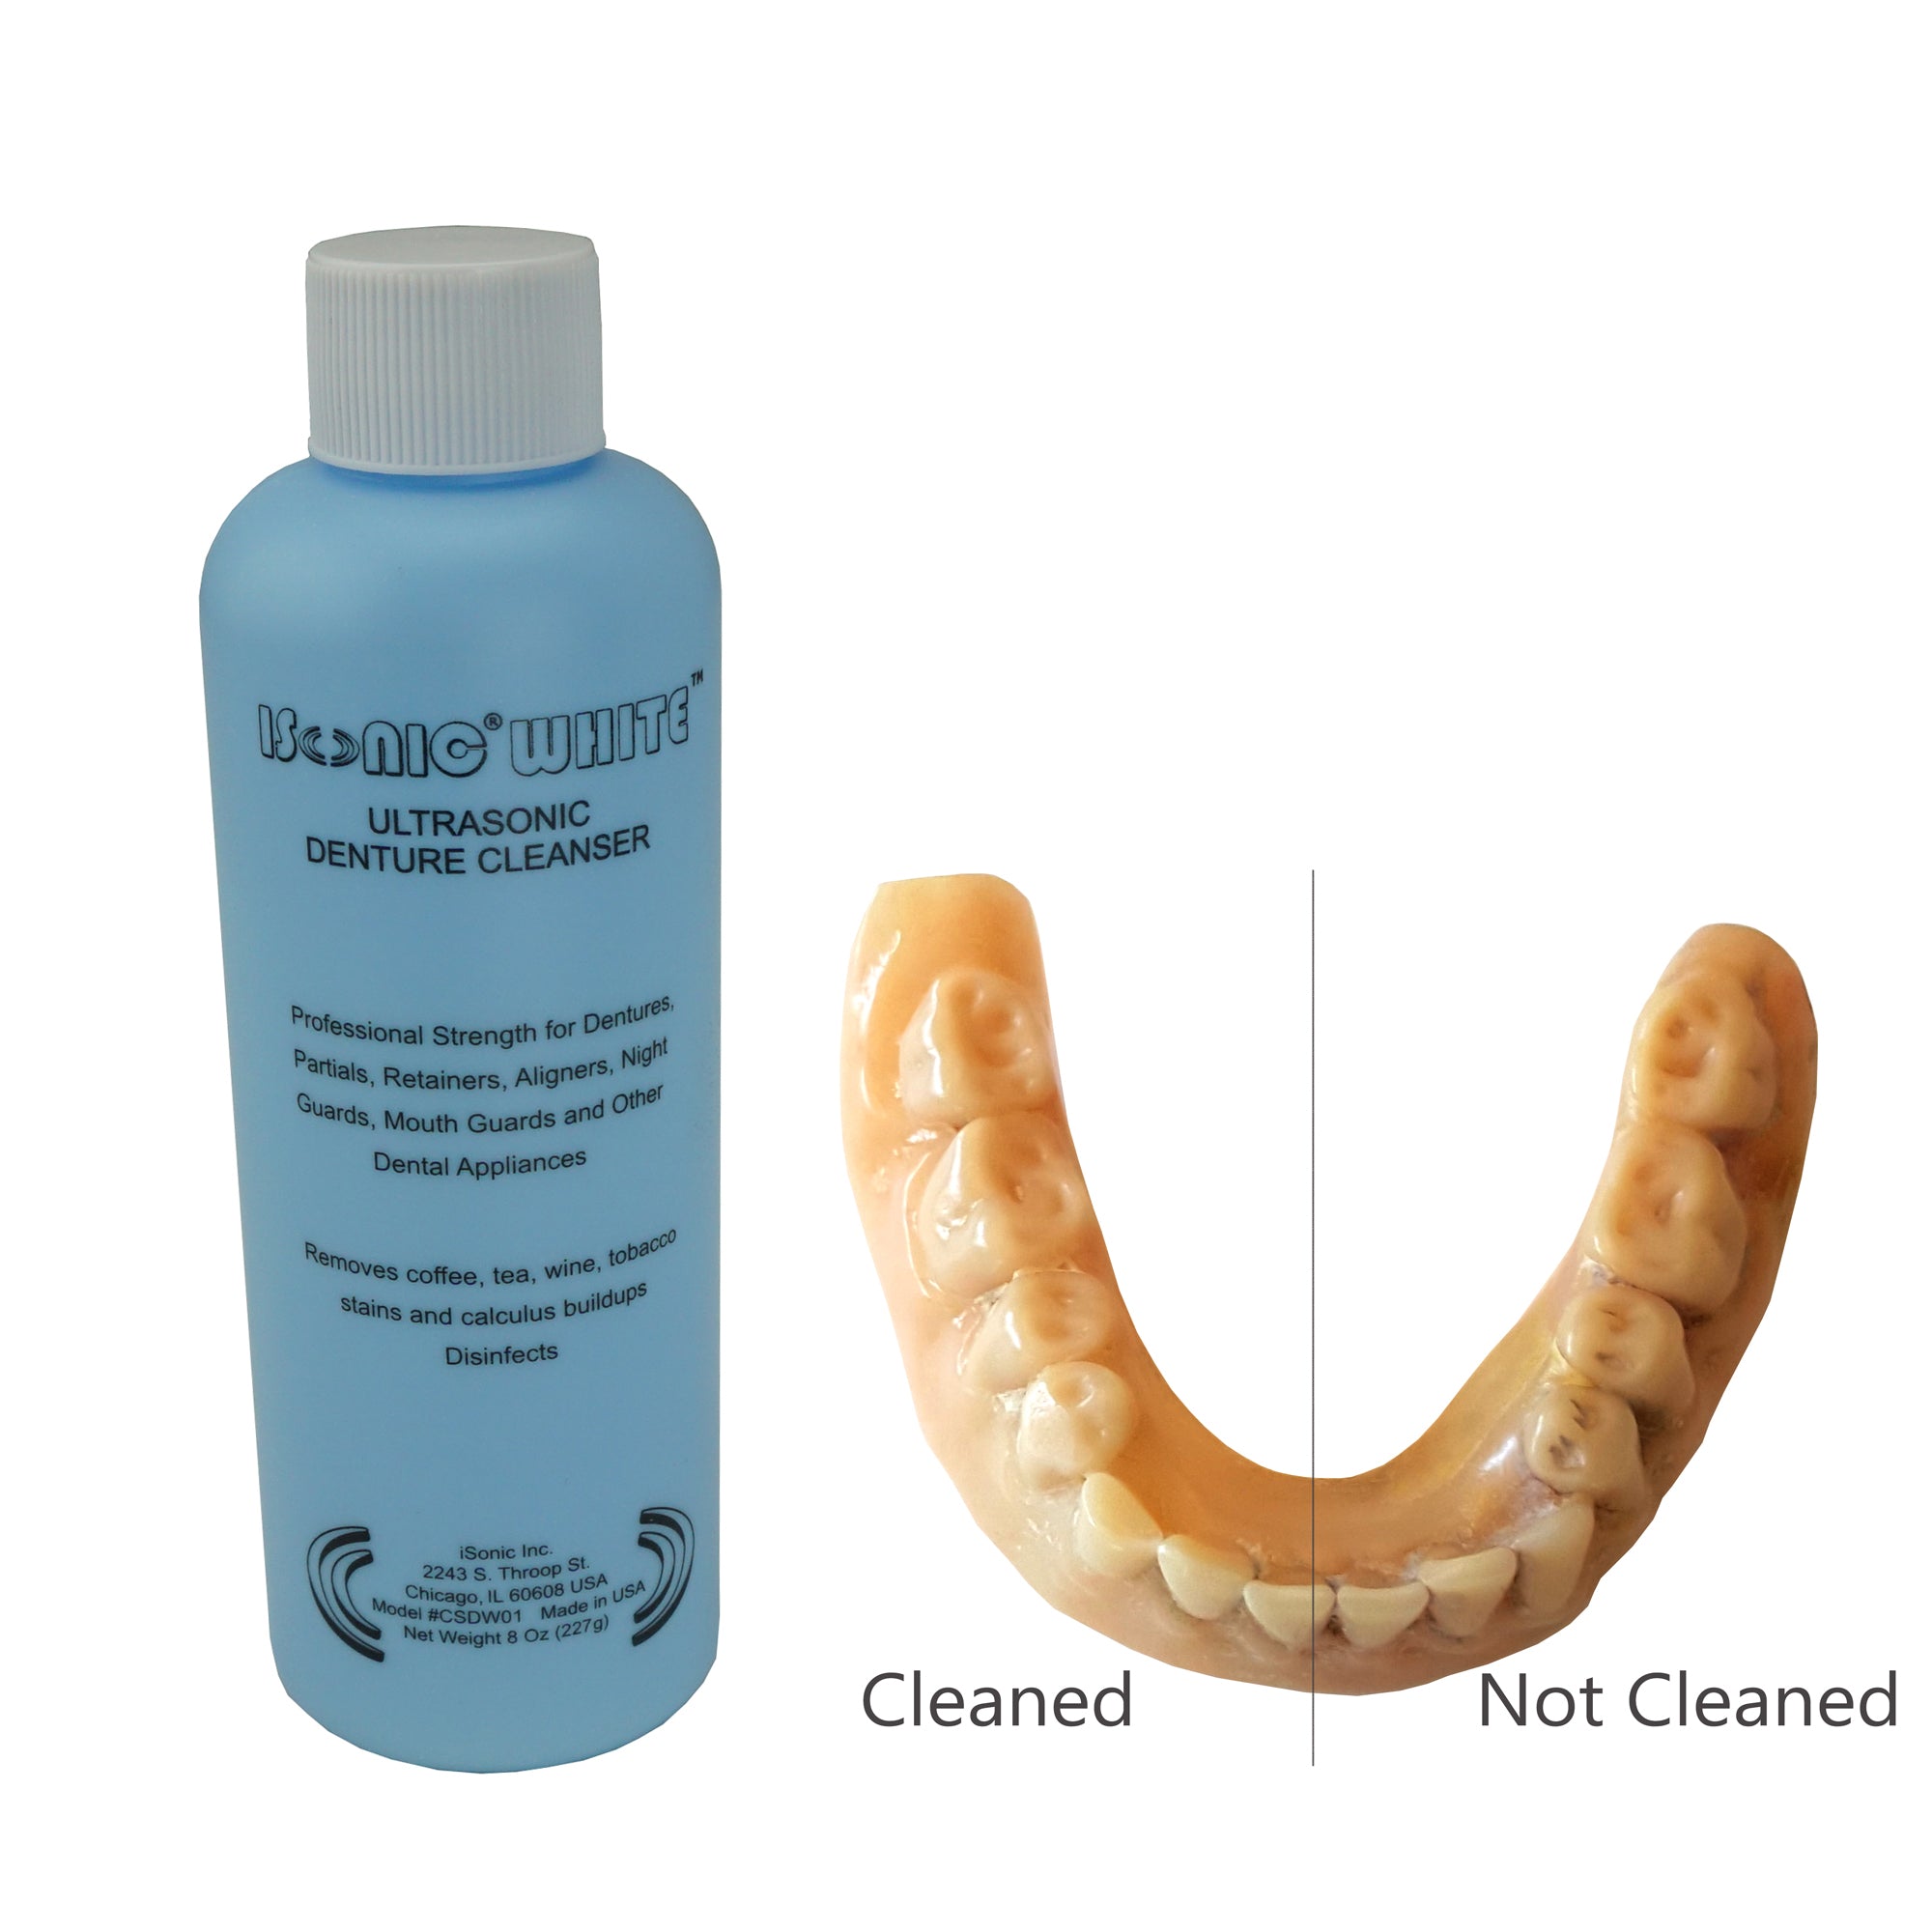 CSDW01 | iSonic? White Denture/Retainer Cleaning Crystal to remove stains and buildups